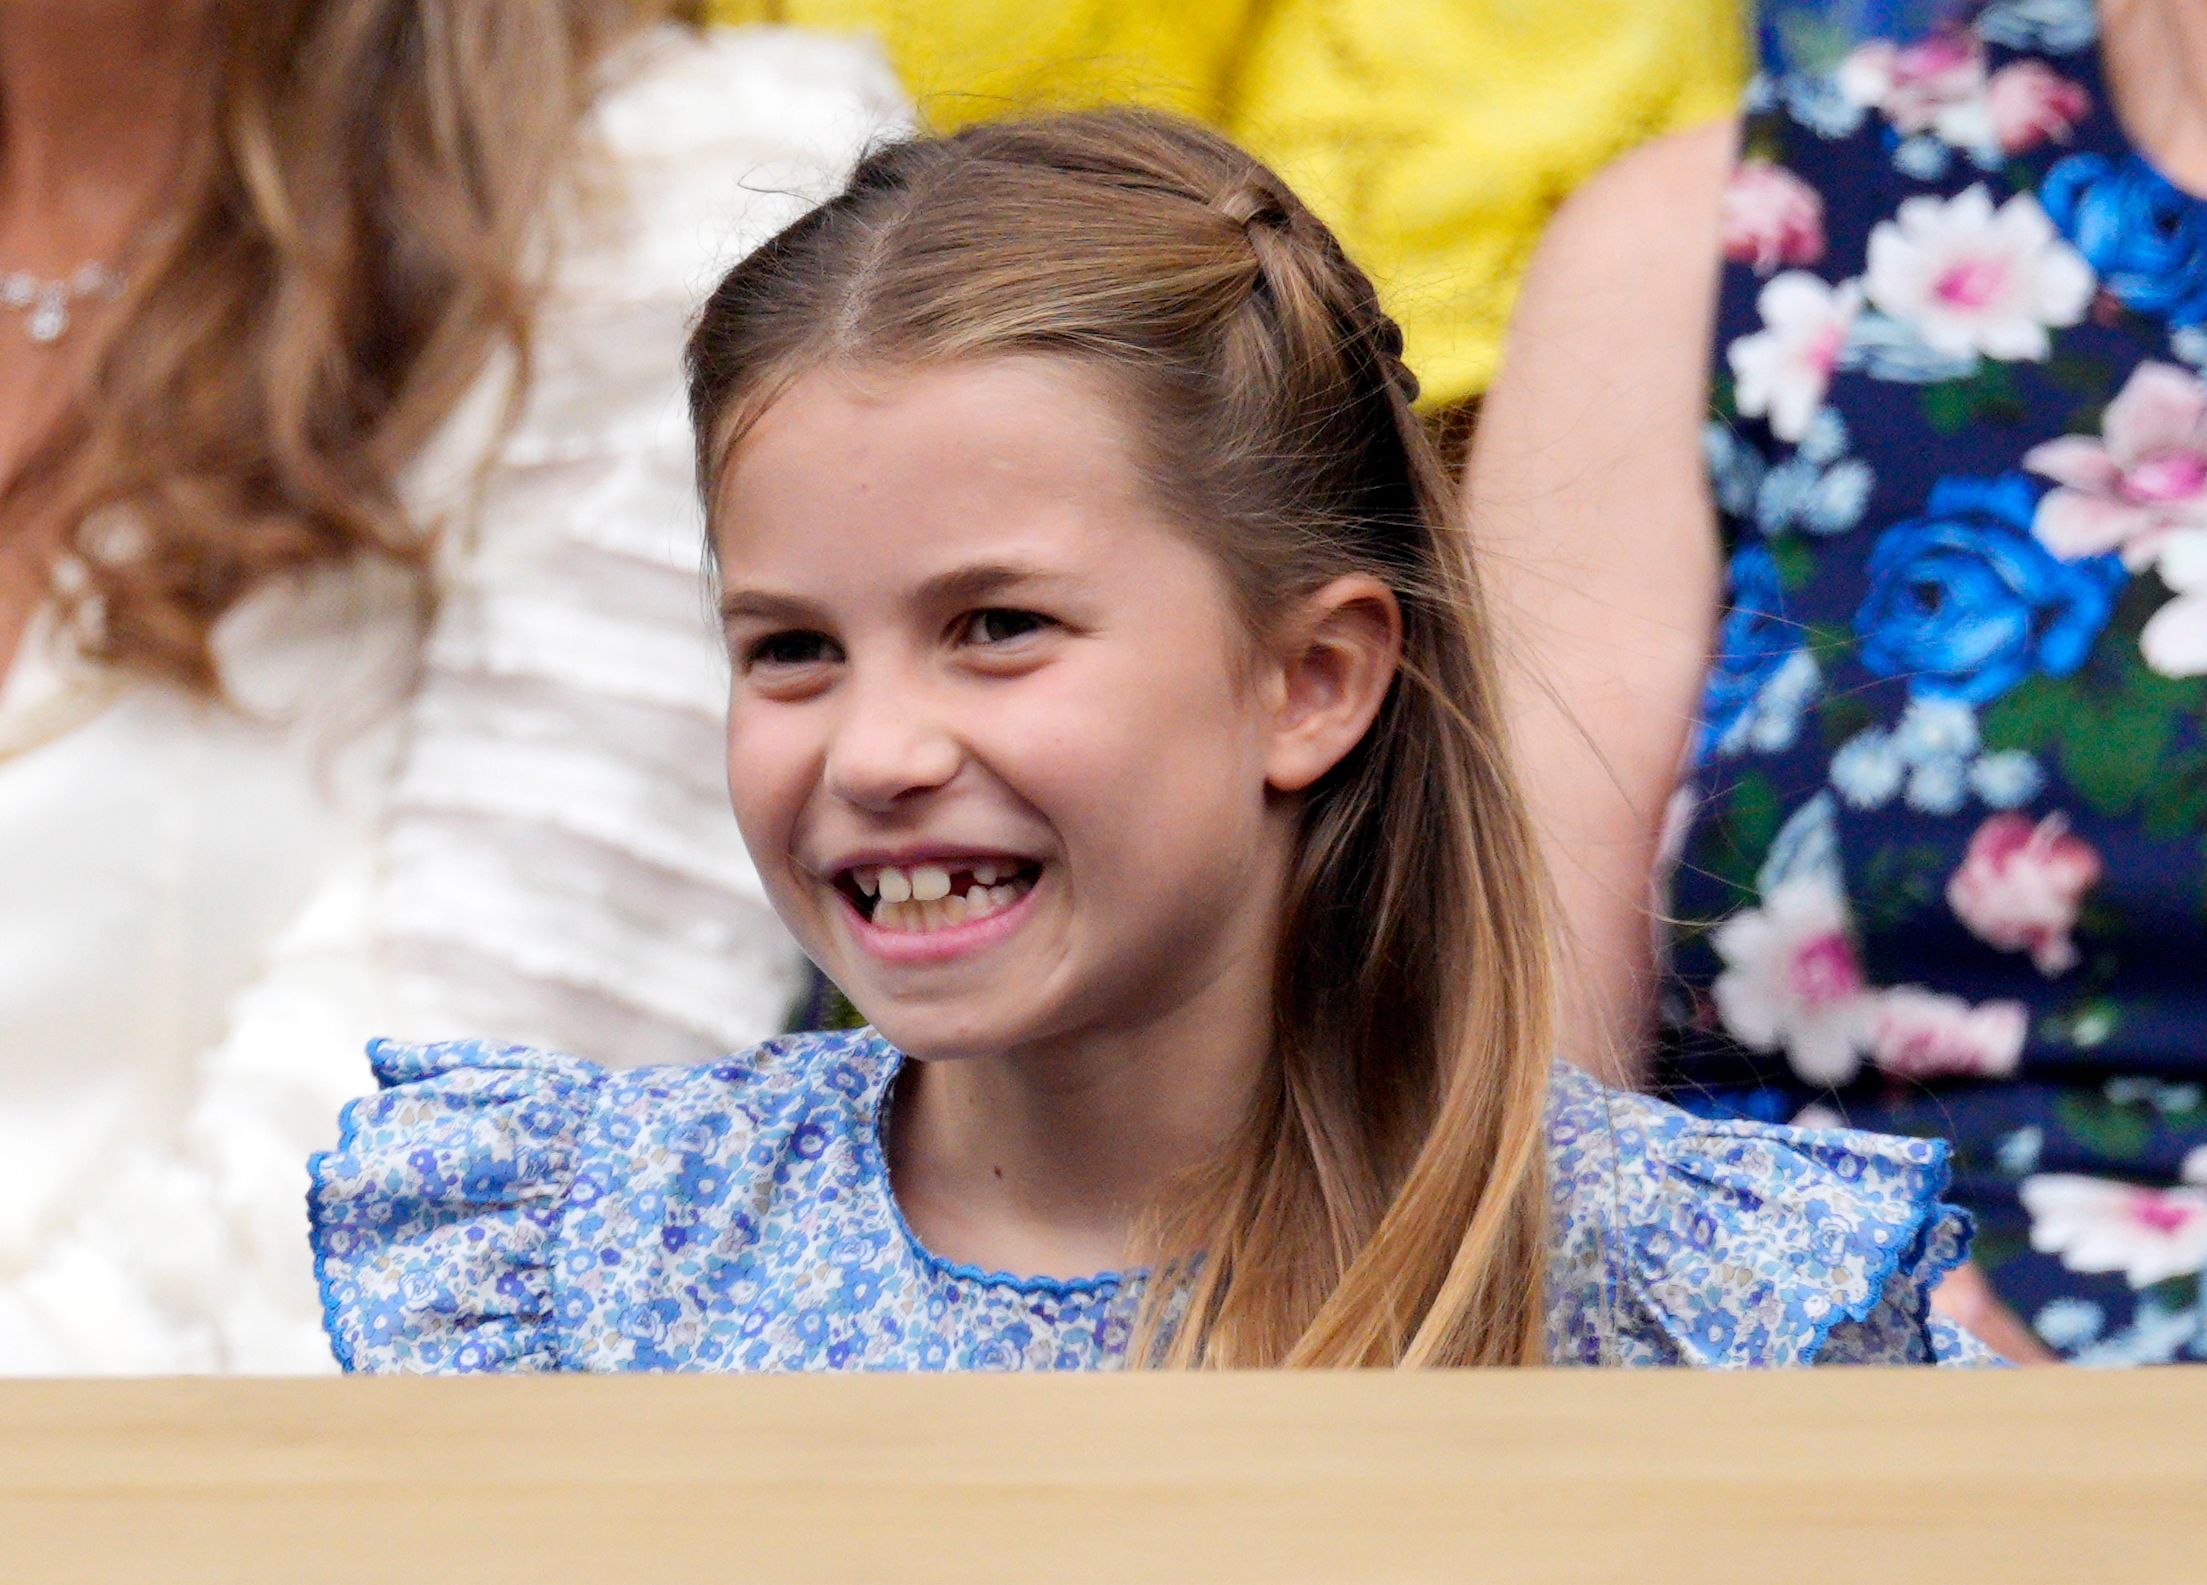 <p>Princess Charlotte was all smiles as she watched the Men's Singles final match from the Royal Box on Centre Court on day 14 of the <a href="https://www.wonderwall.com/celebrity/wimbledon-2023-the-best-pictures-of-royals-and-stars-at-the-tennis-championships-758994.gallery">Wimbledon Tennis Championships</a> at the All England Lawn Tennis and Croquet Club in London on July 16, 2023.</p>